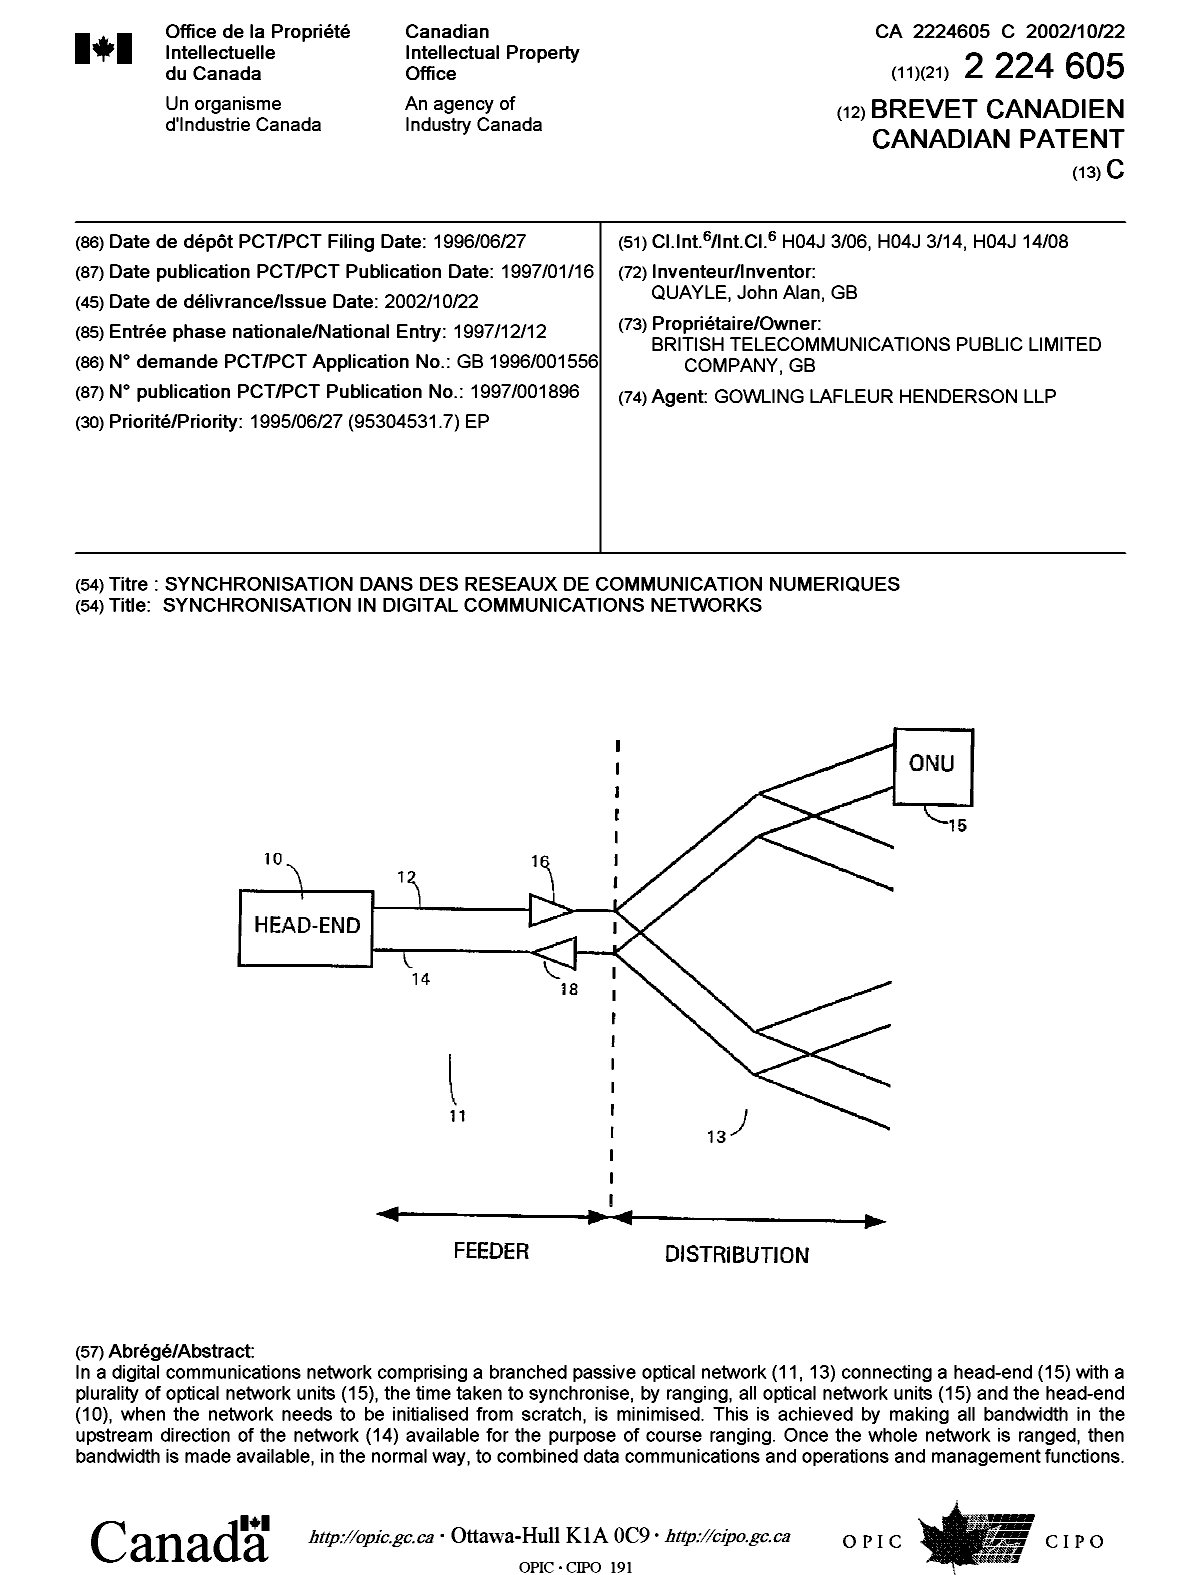 Canadian Patent Document 2224605. Cover Page 20020919. Image 1 of 1